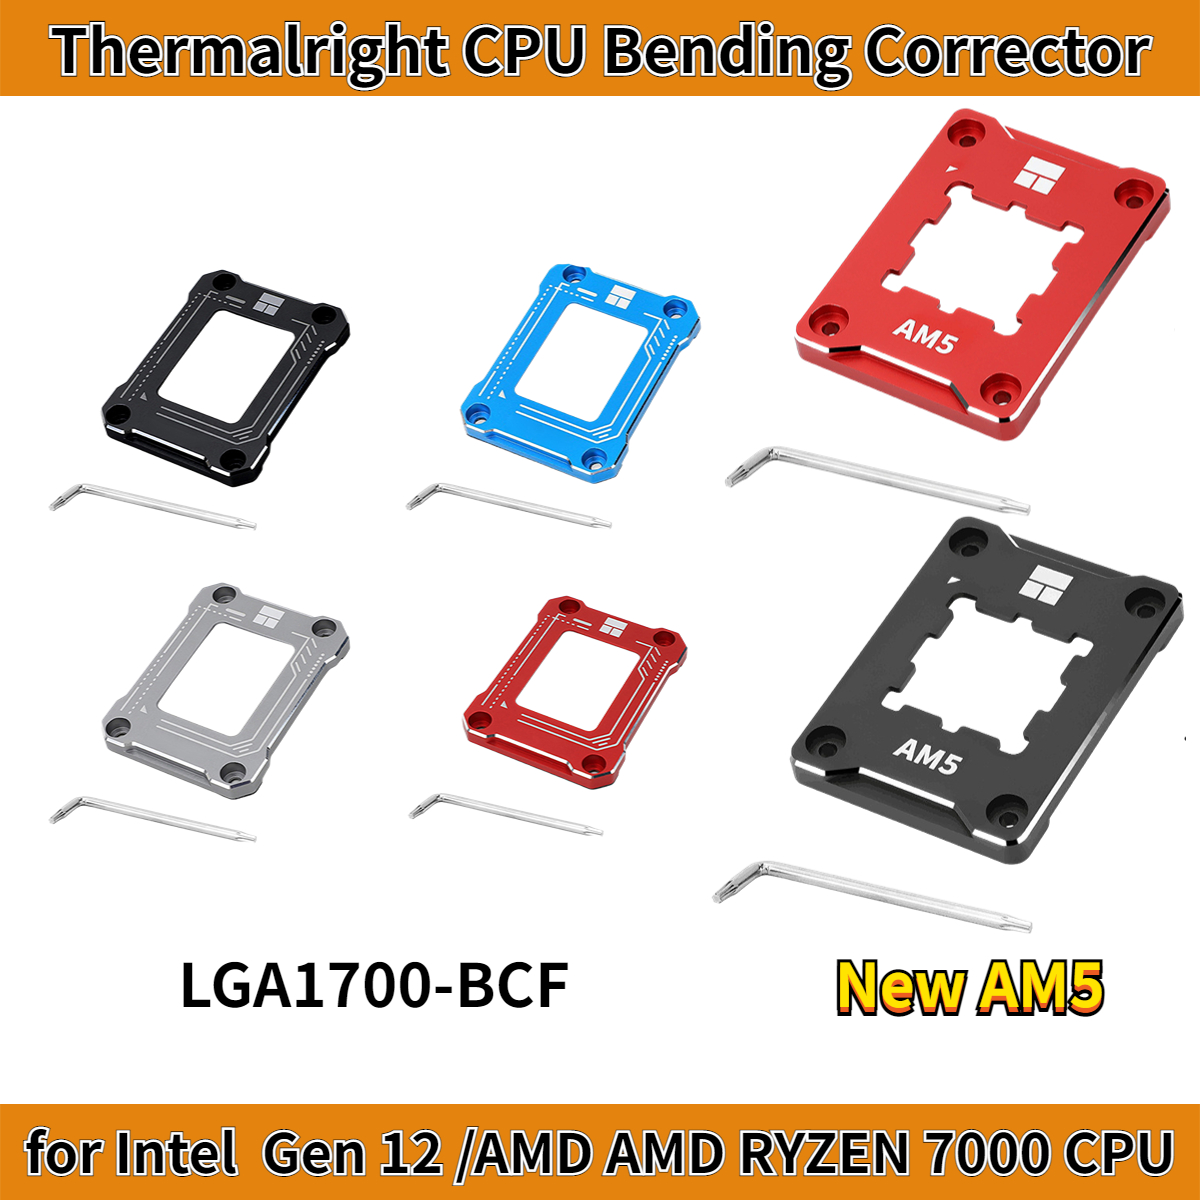 Thermalright-LGA1700-BCF-AMD-ASF-CPU-Bending-Corection-Fixed-Buckle-CNC-Aluminum-Alloy-for-Intel-Gen